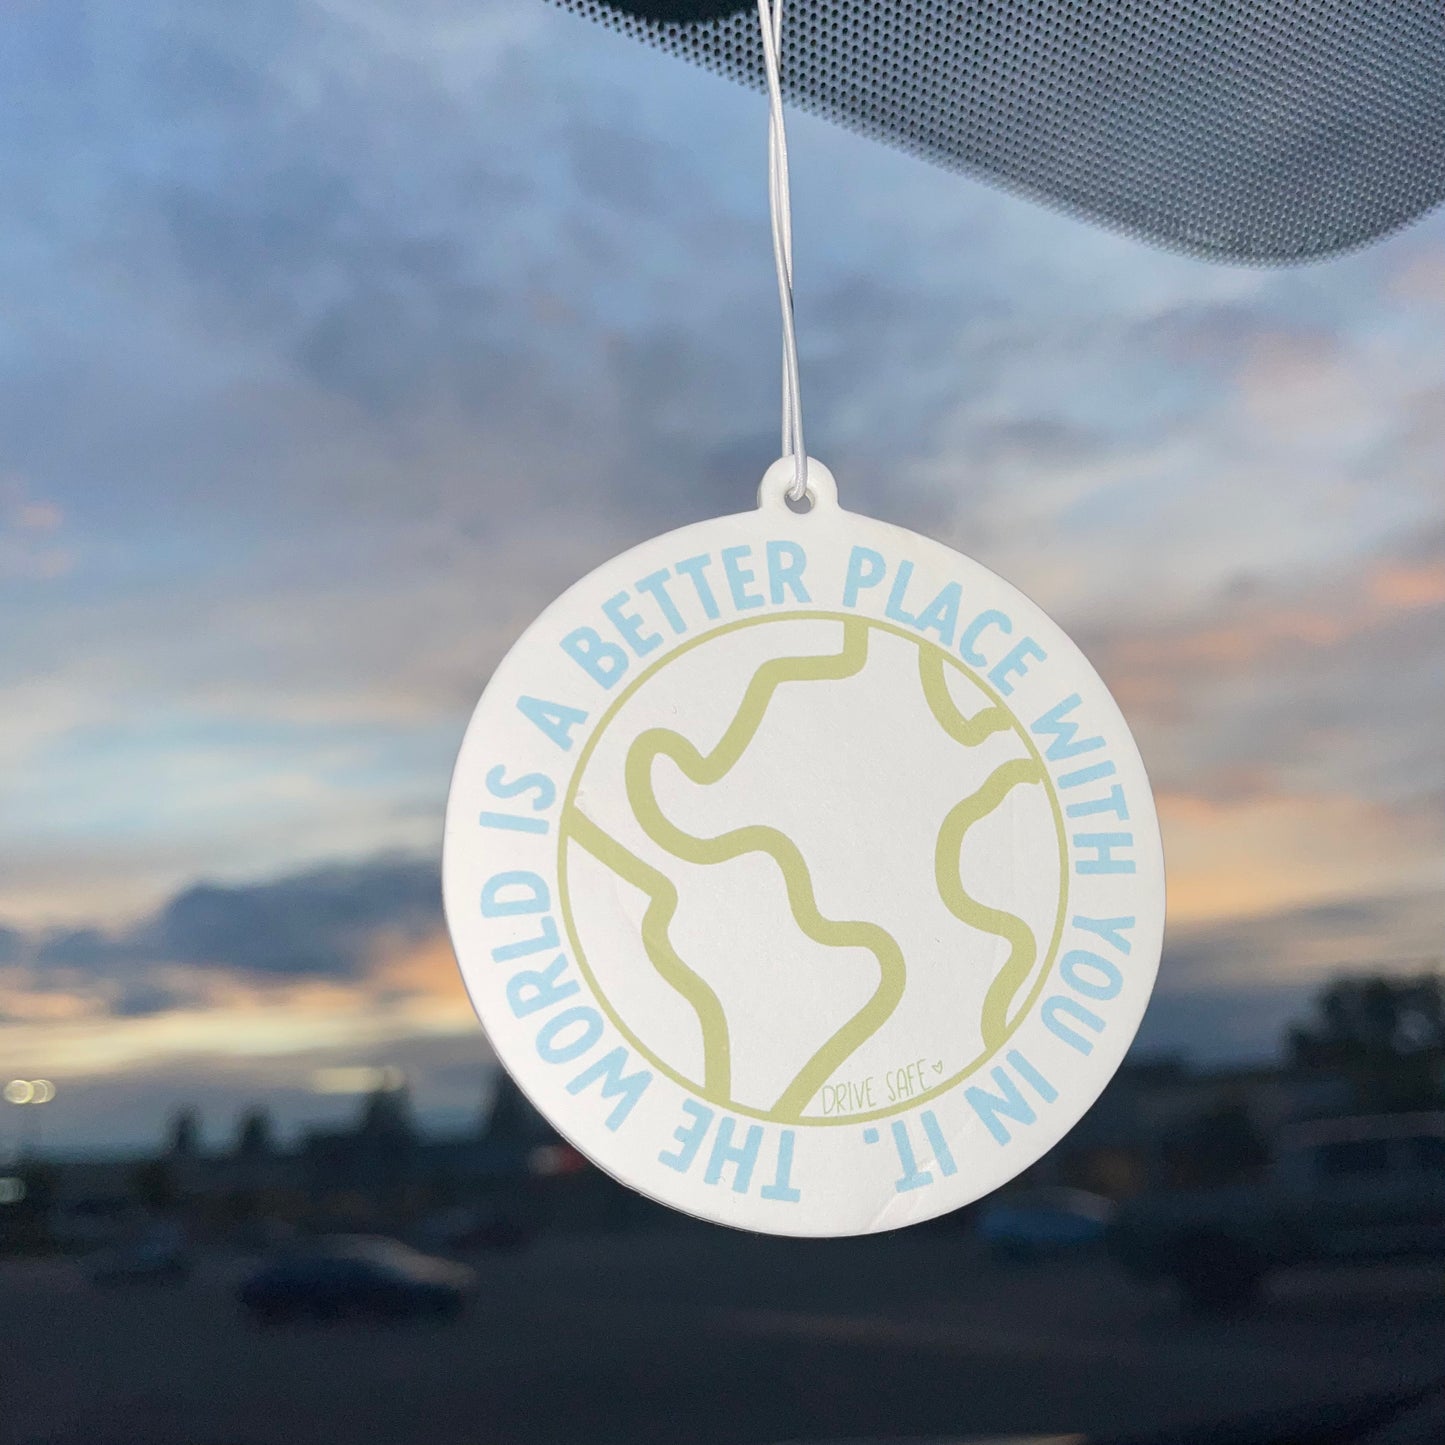 The World Is A Better Place With You In It (Drive Safe) - Car Air Freshener - Green Tea Scent